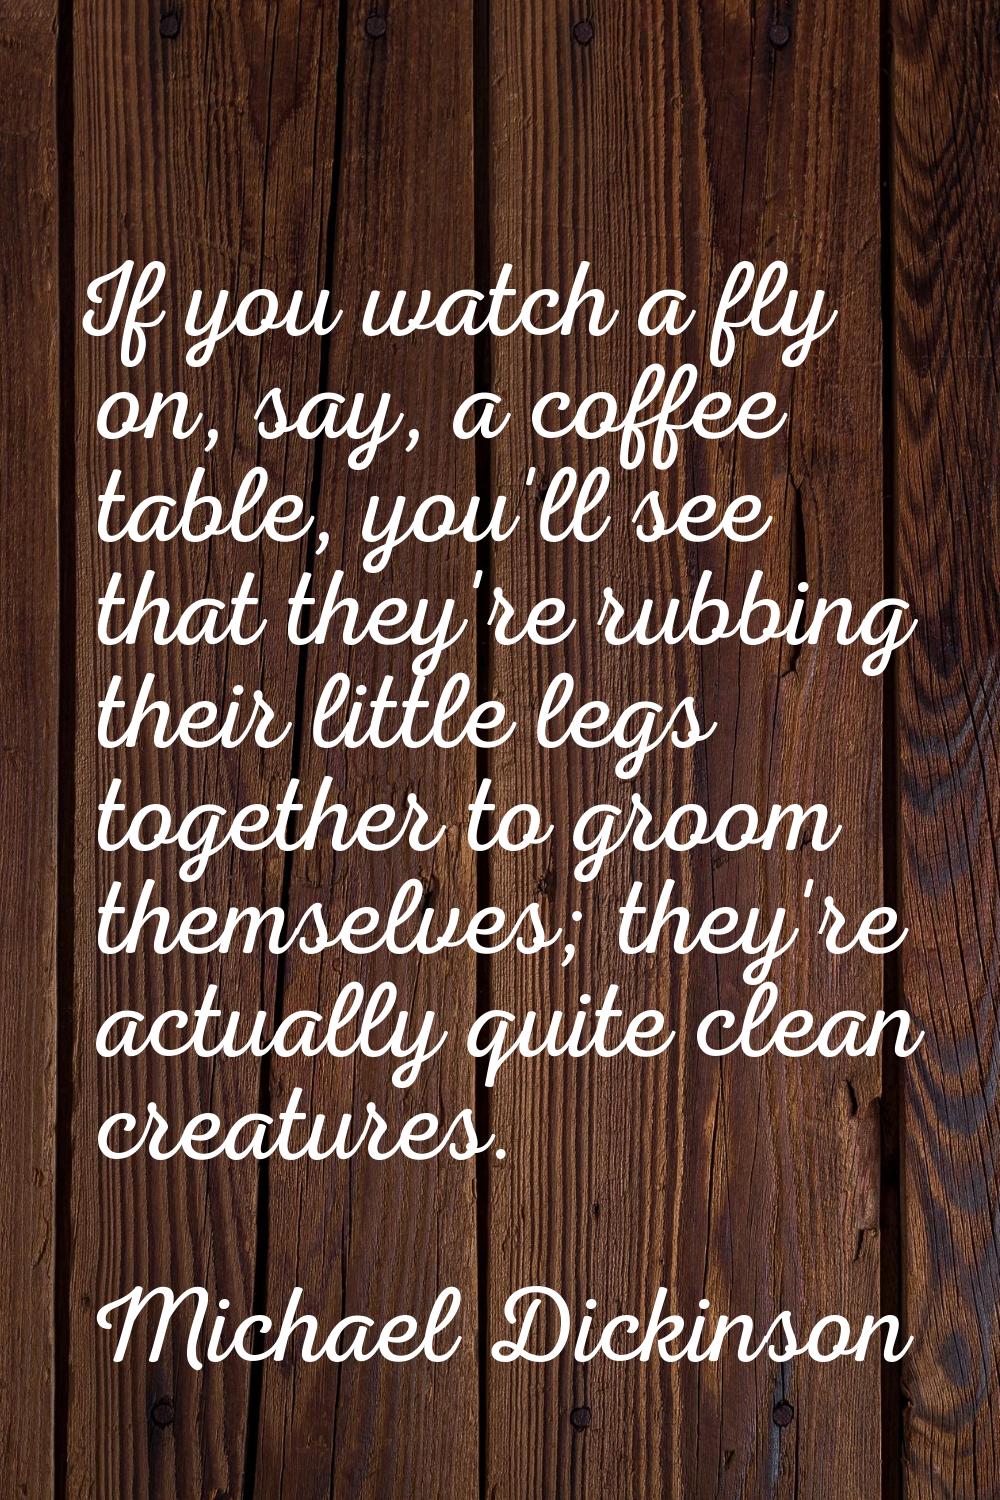 If you watch a fly on, say, a coffee table, you'll see that they're rubbing their little legs toget